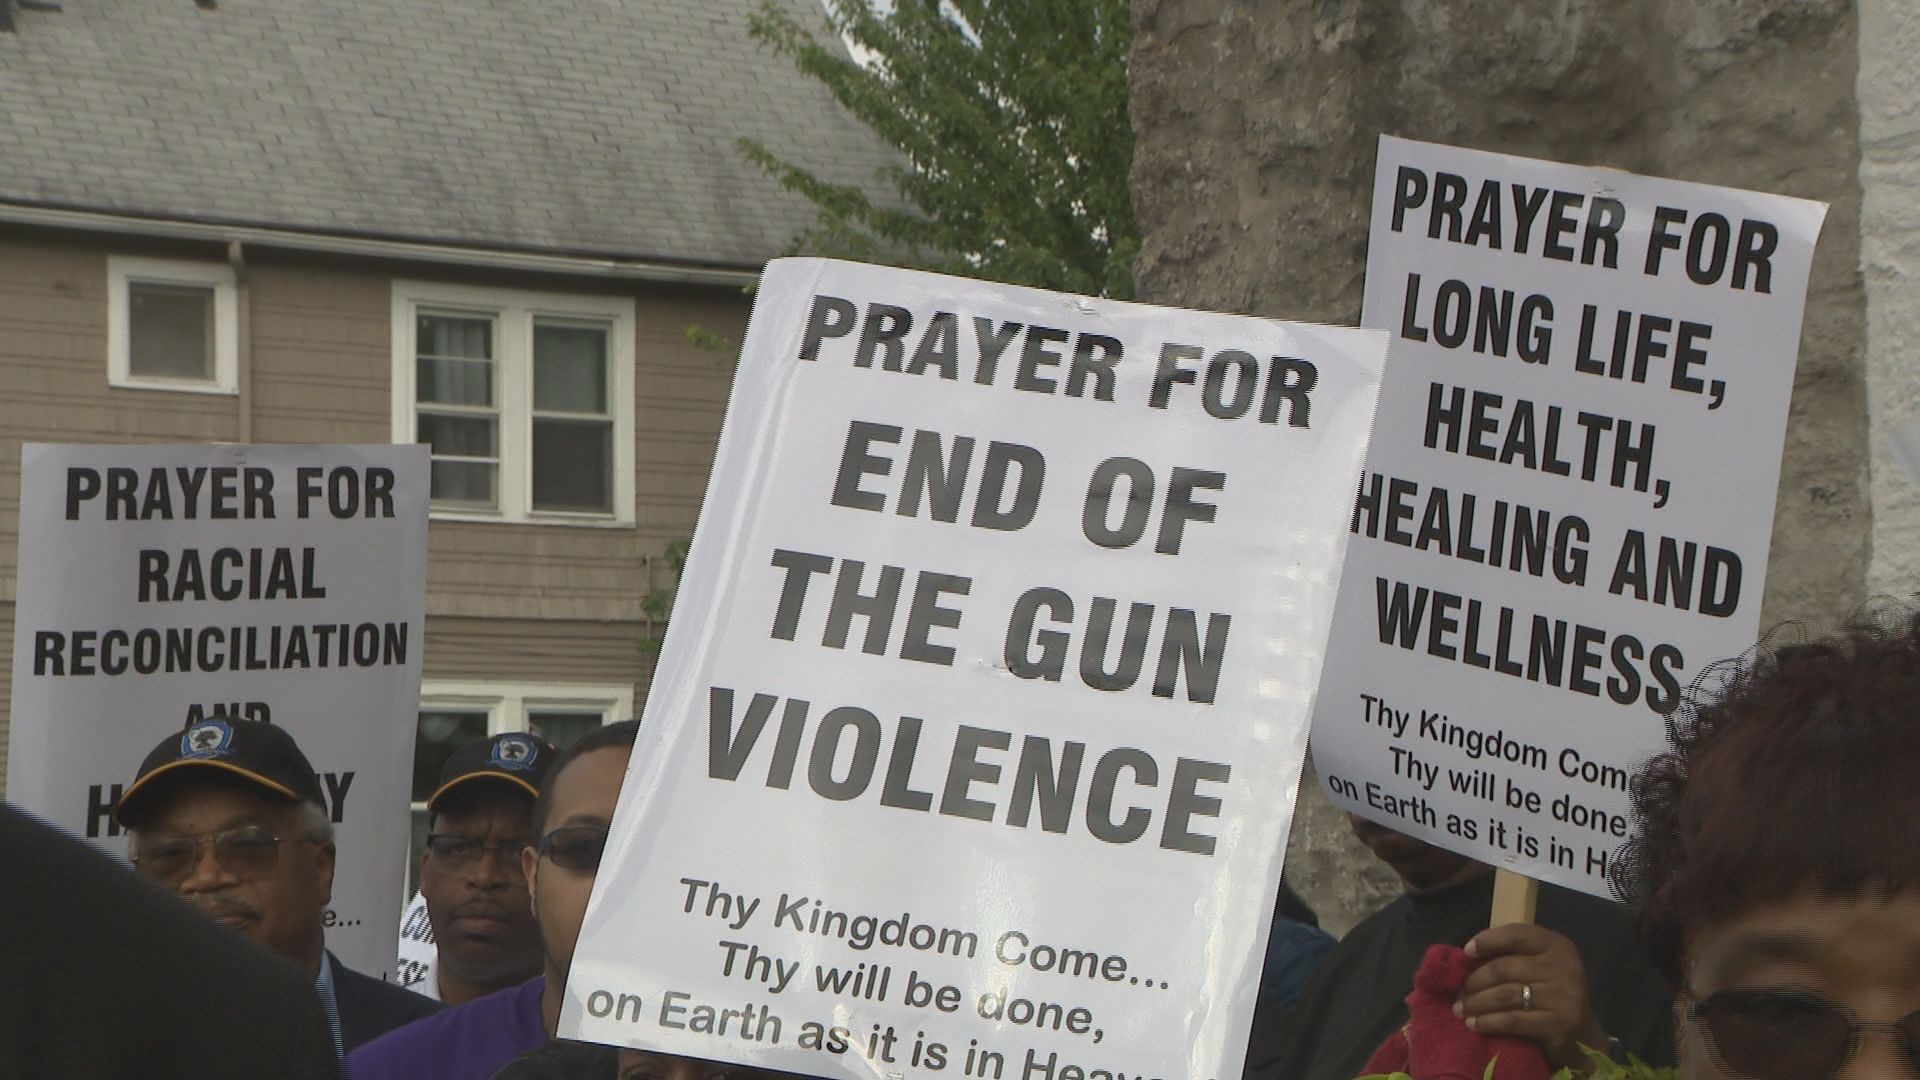 Church of God in Christ Inc. General Council of Pastors and Elders host March of Remembrance For Victims of 5/14 Shooting